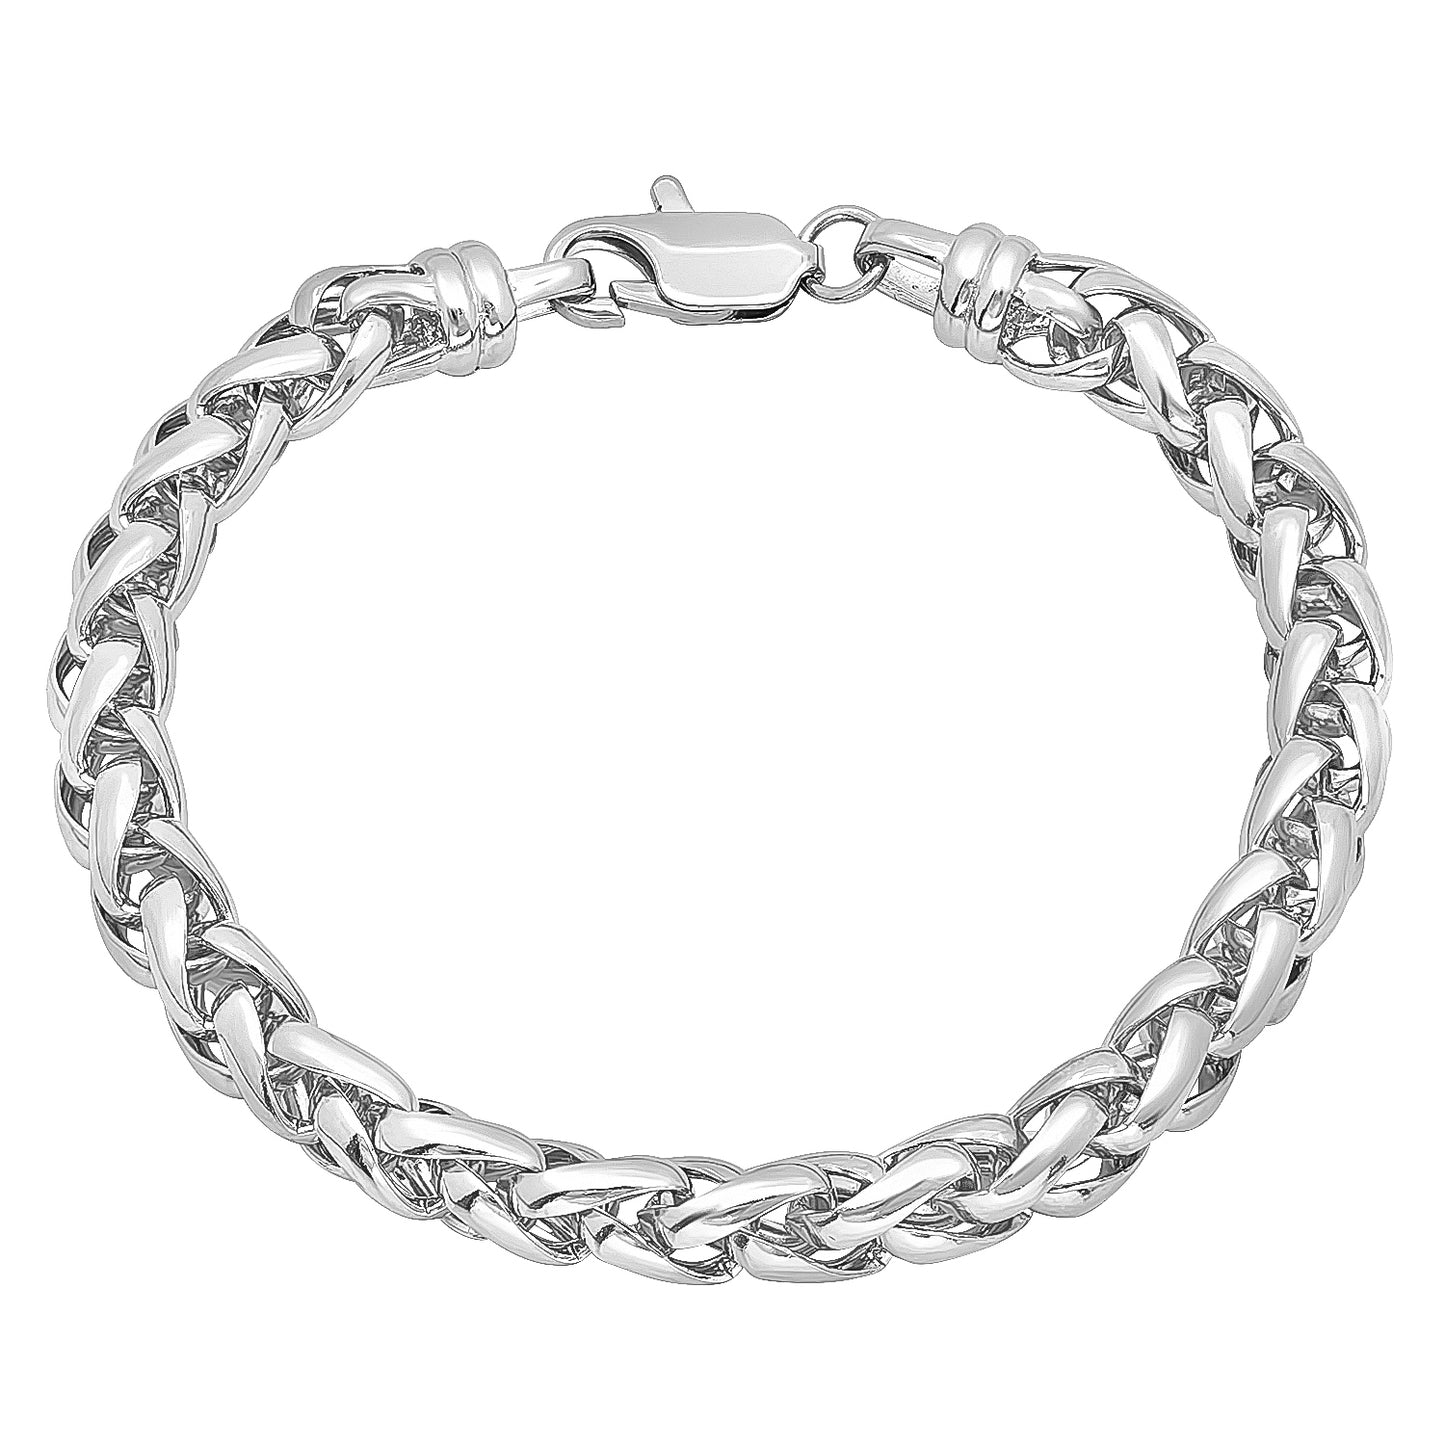 Men's 7.5mm 25 mills Rhodium Plated Silver Wheat Chain Necklace, 8'9'24'30'36" + Jewelry Cloth (SKU: RL-097C)